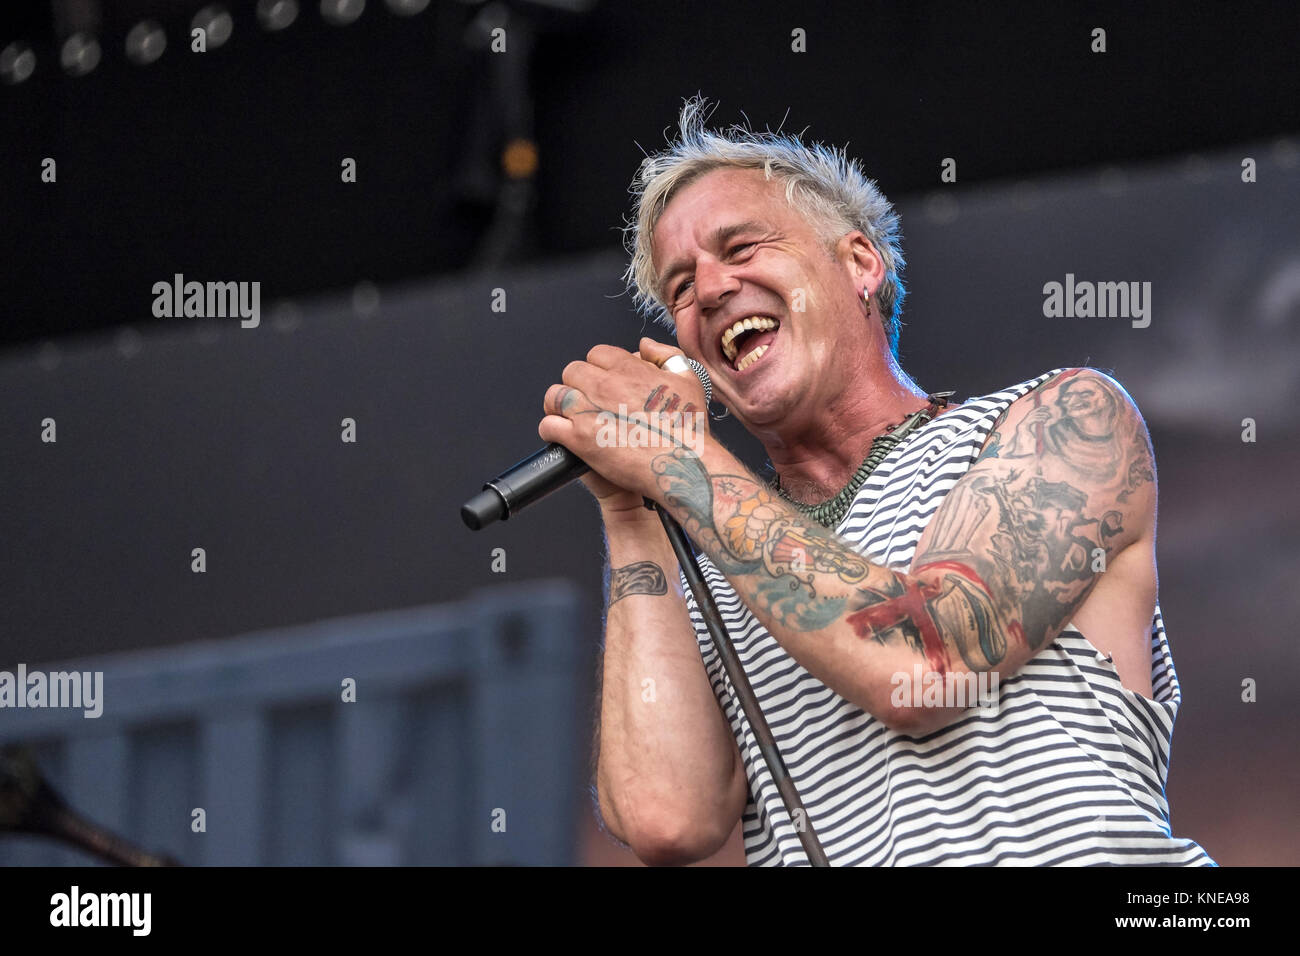 The German power metal band In Extremo performs a live concert at the Swiss music festival Greenfield Festival 2015 in Interlaken. Here vocalist Michael Robert Rhein aka Das Letzte Einhorn is seen live on stage. Switzerland, 12/06 2015. Stock Photo